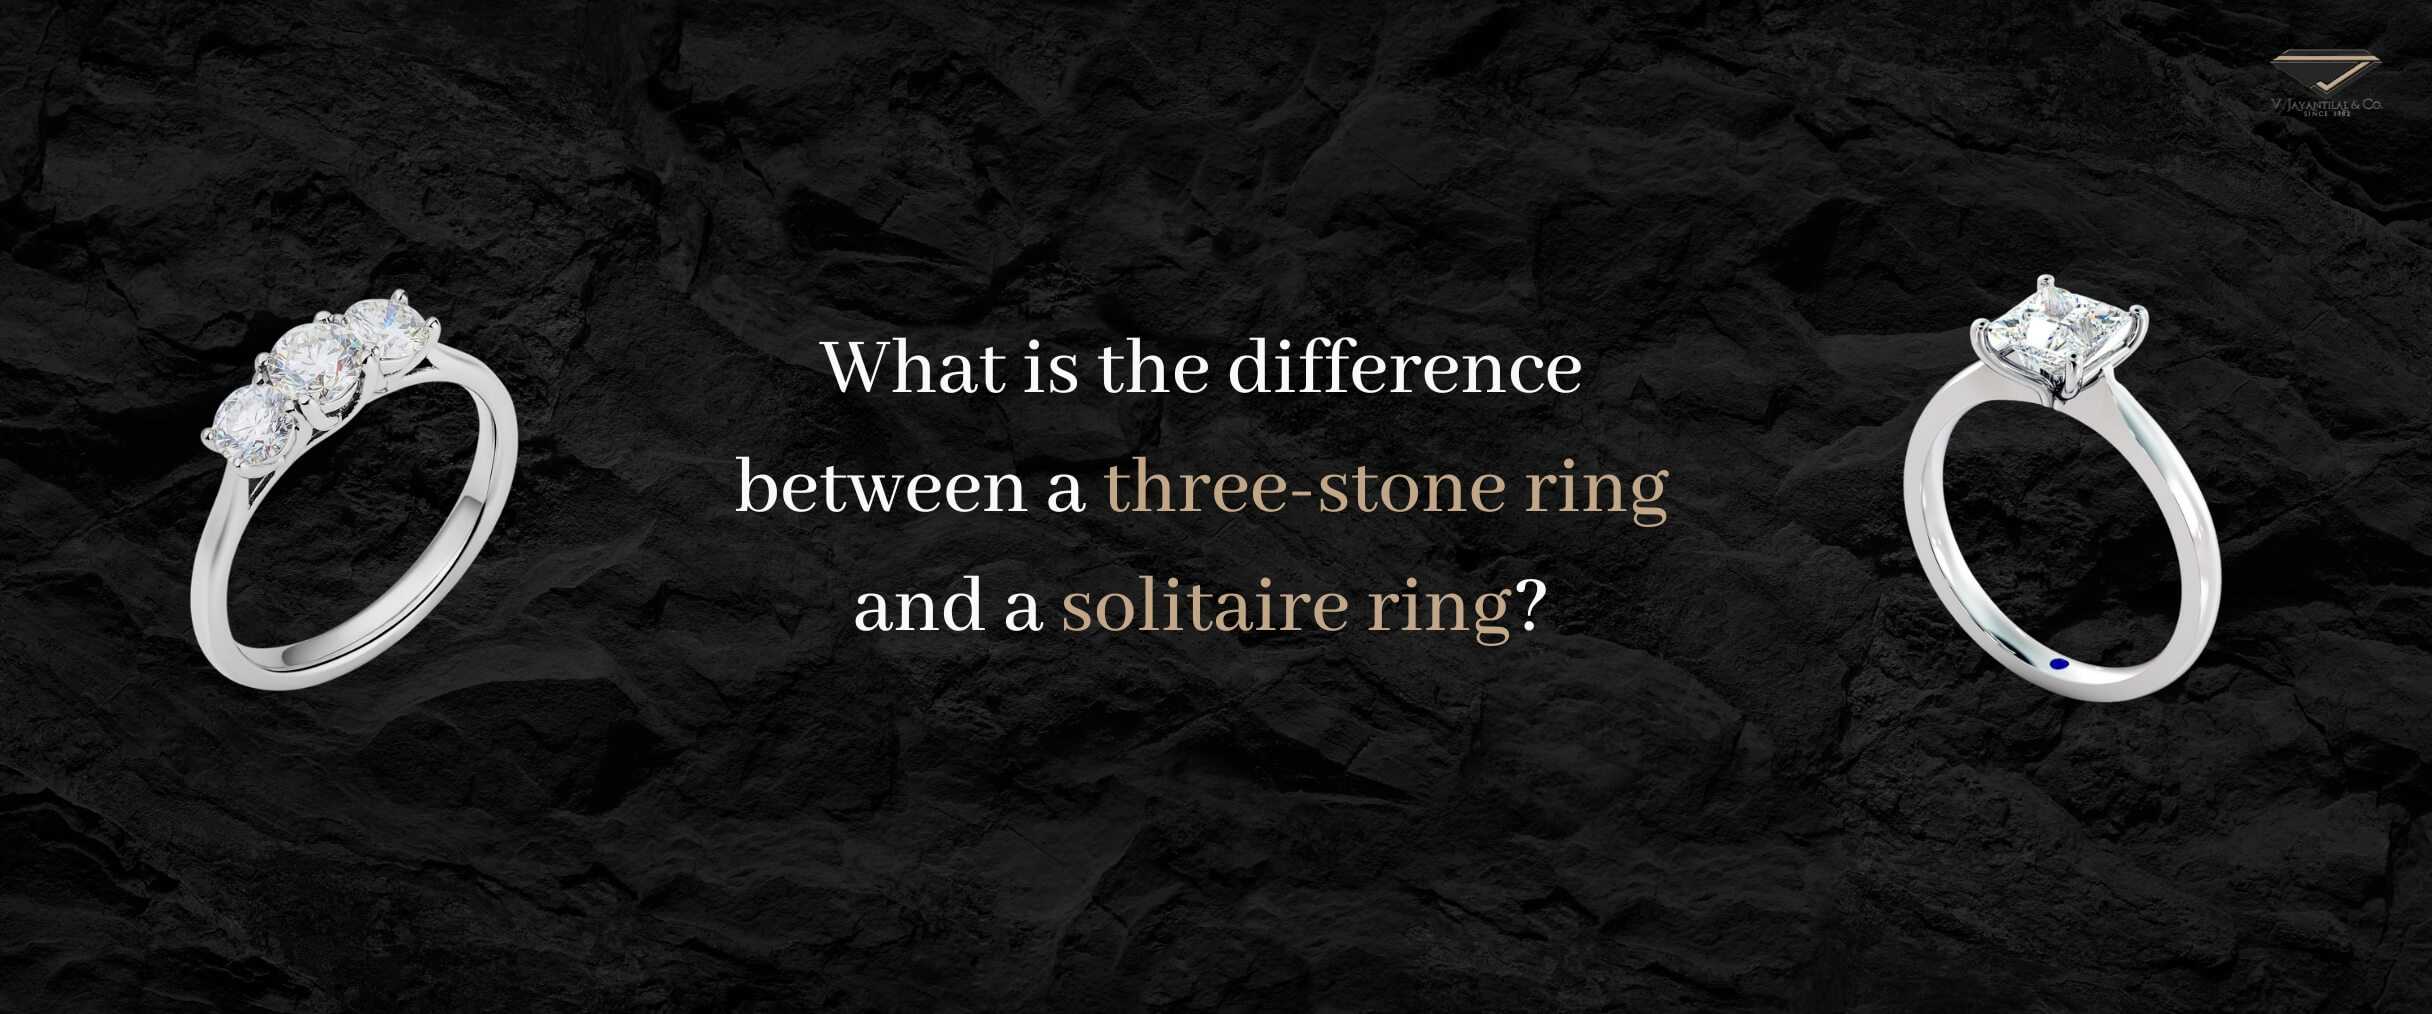 7 Differences Between a Three-Stone Ring and a Solitaire Ring